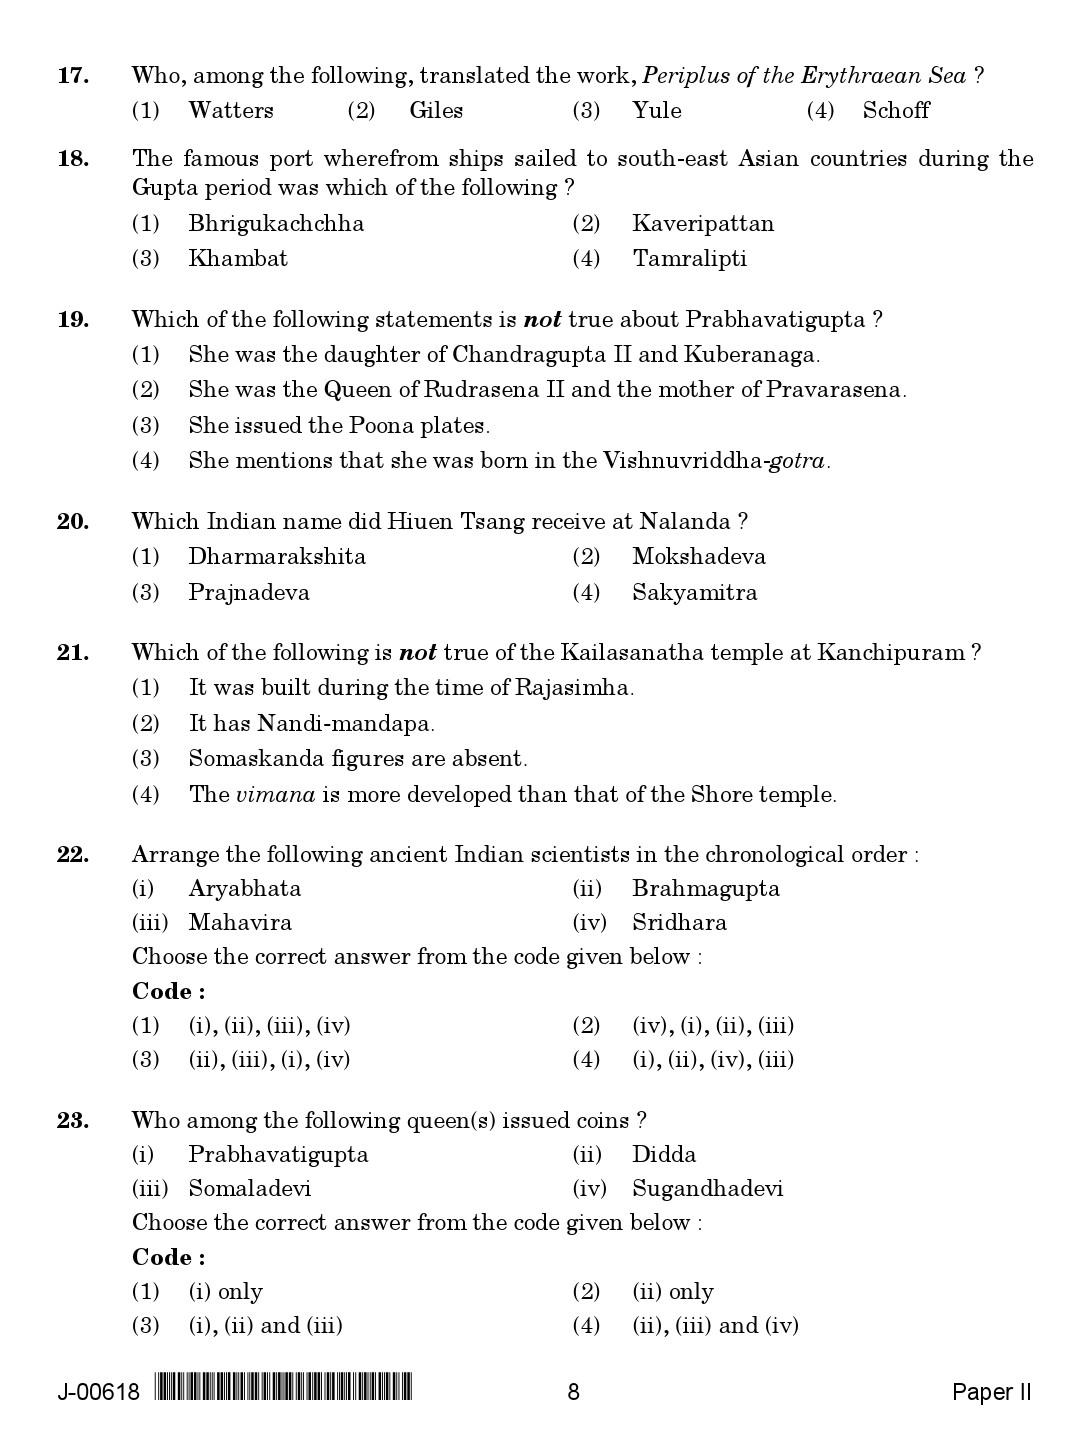 History Question Paper II July 2018 in English 2nd Exam 5